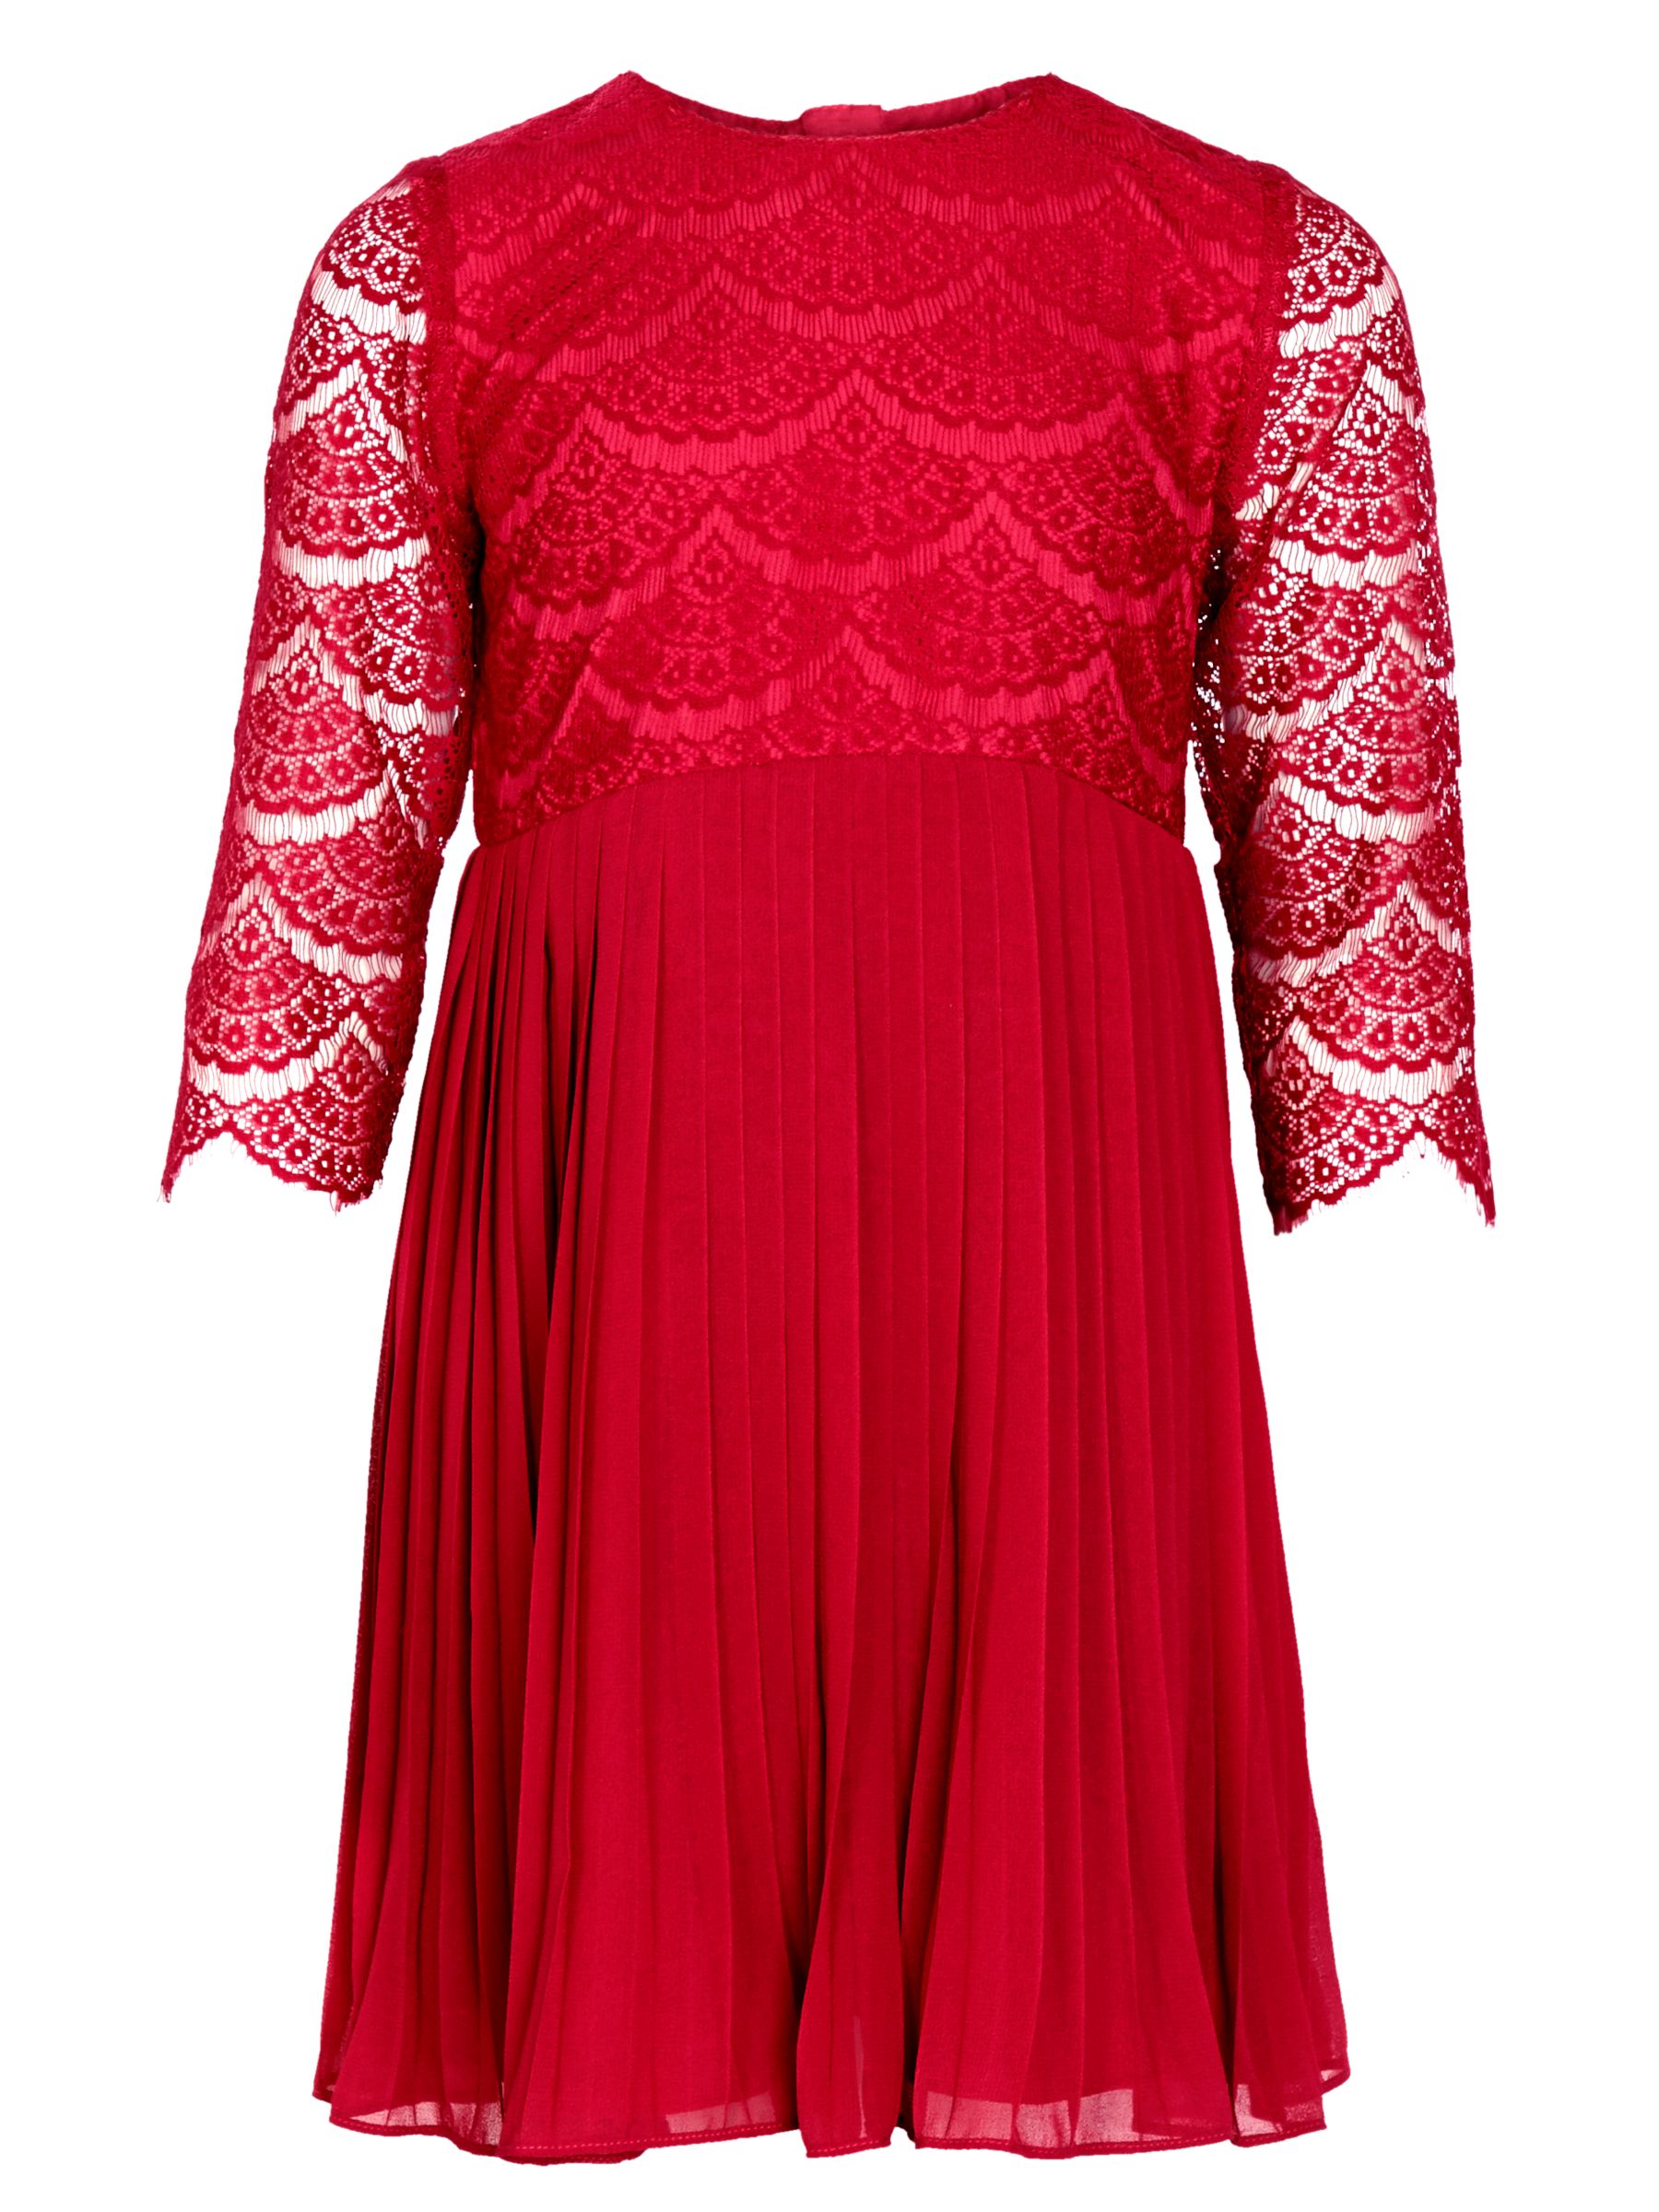 John Lewis Girl Lace Party Dress, Red at John Lewis & Partners